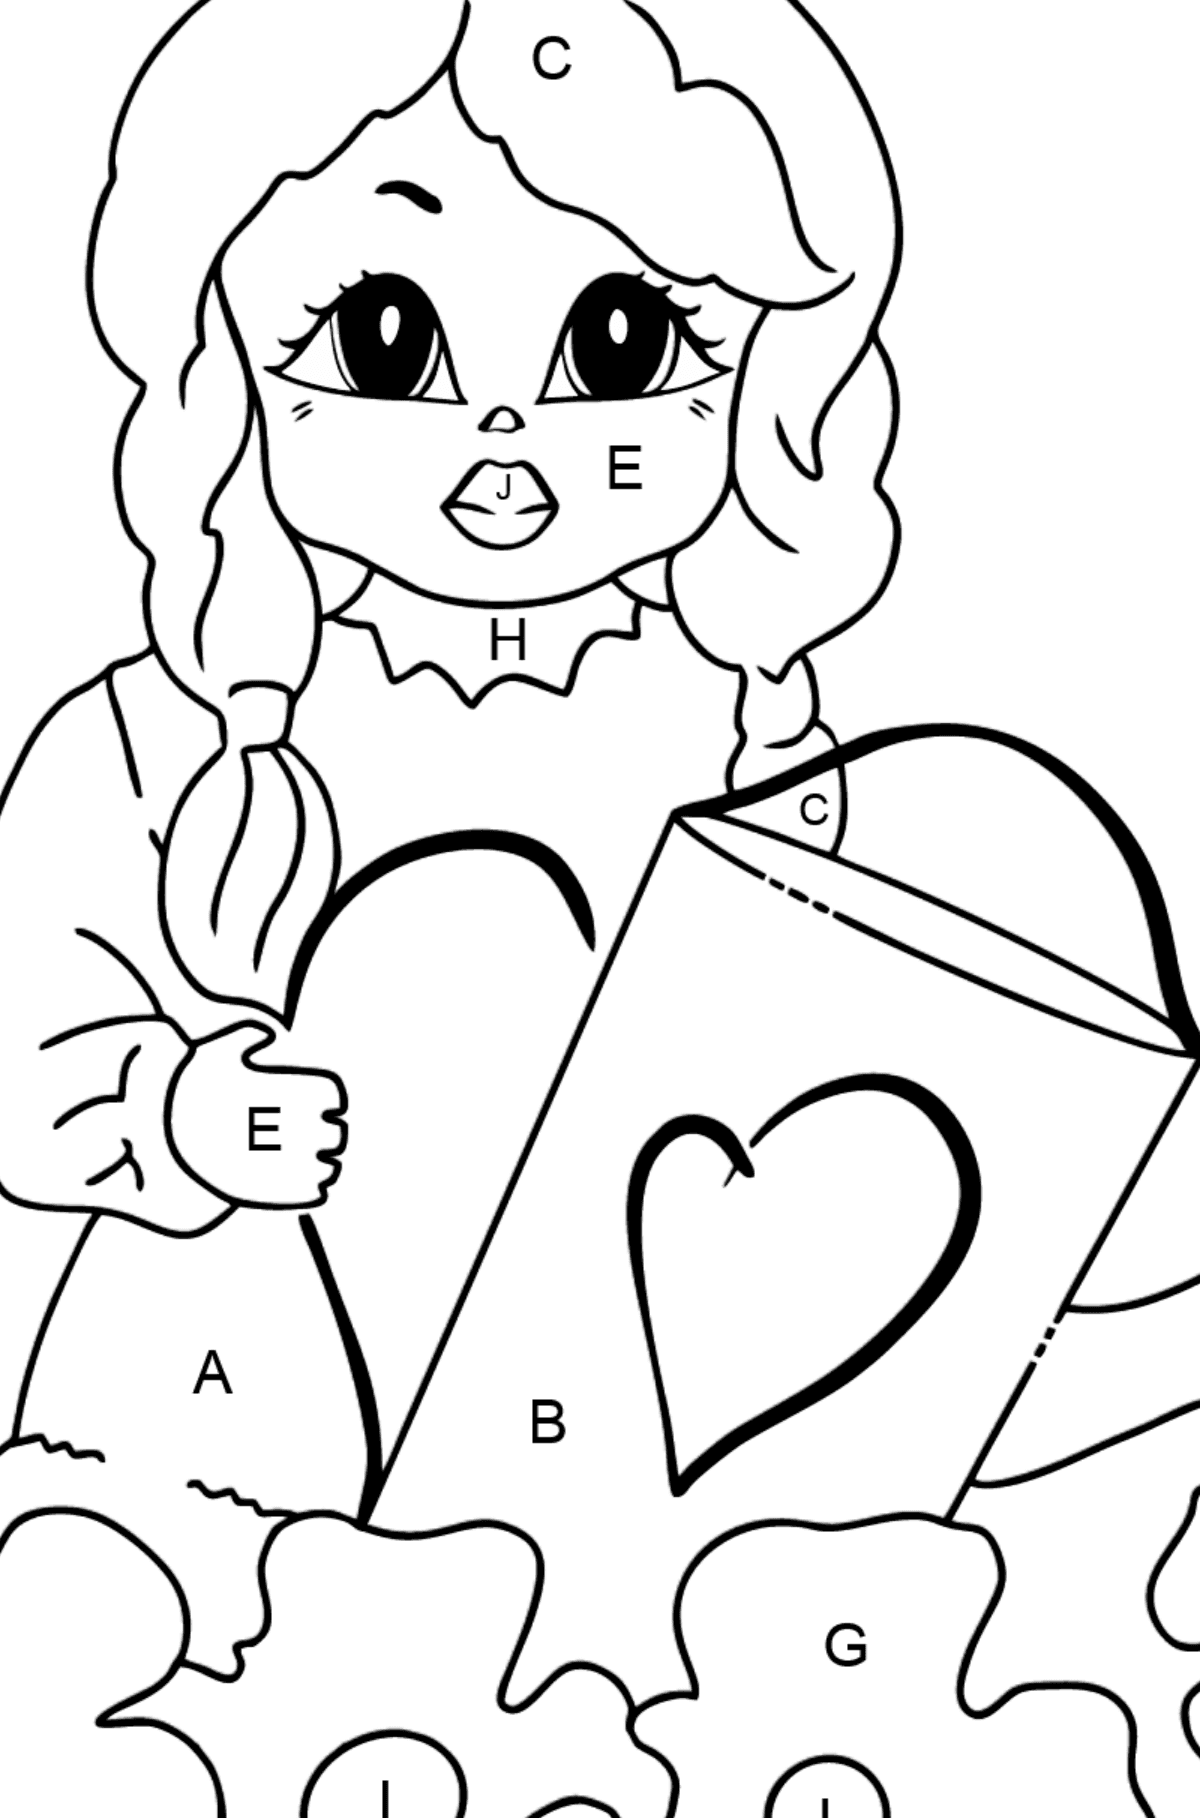 Coloring Picture - A Princess with a Watering Can - Coloring by Letters for Kids